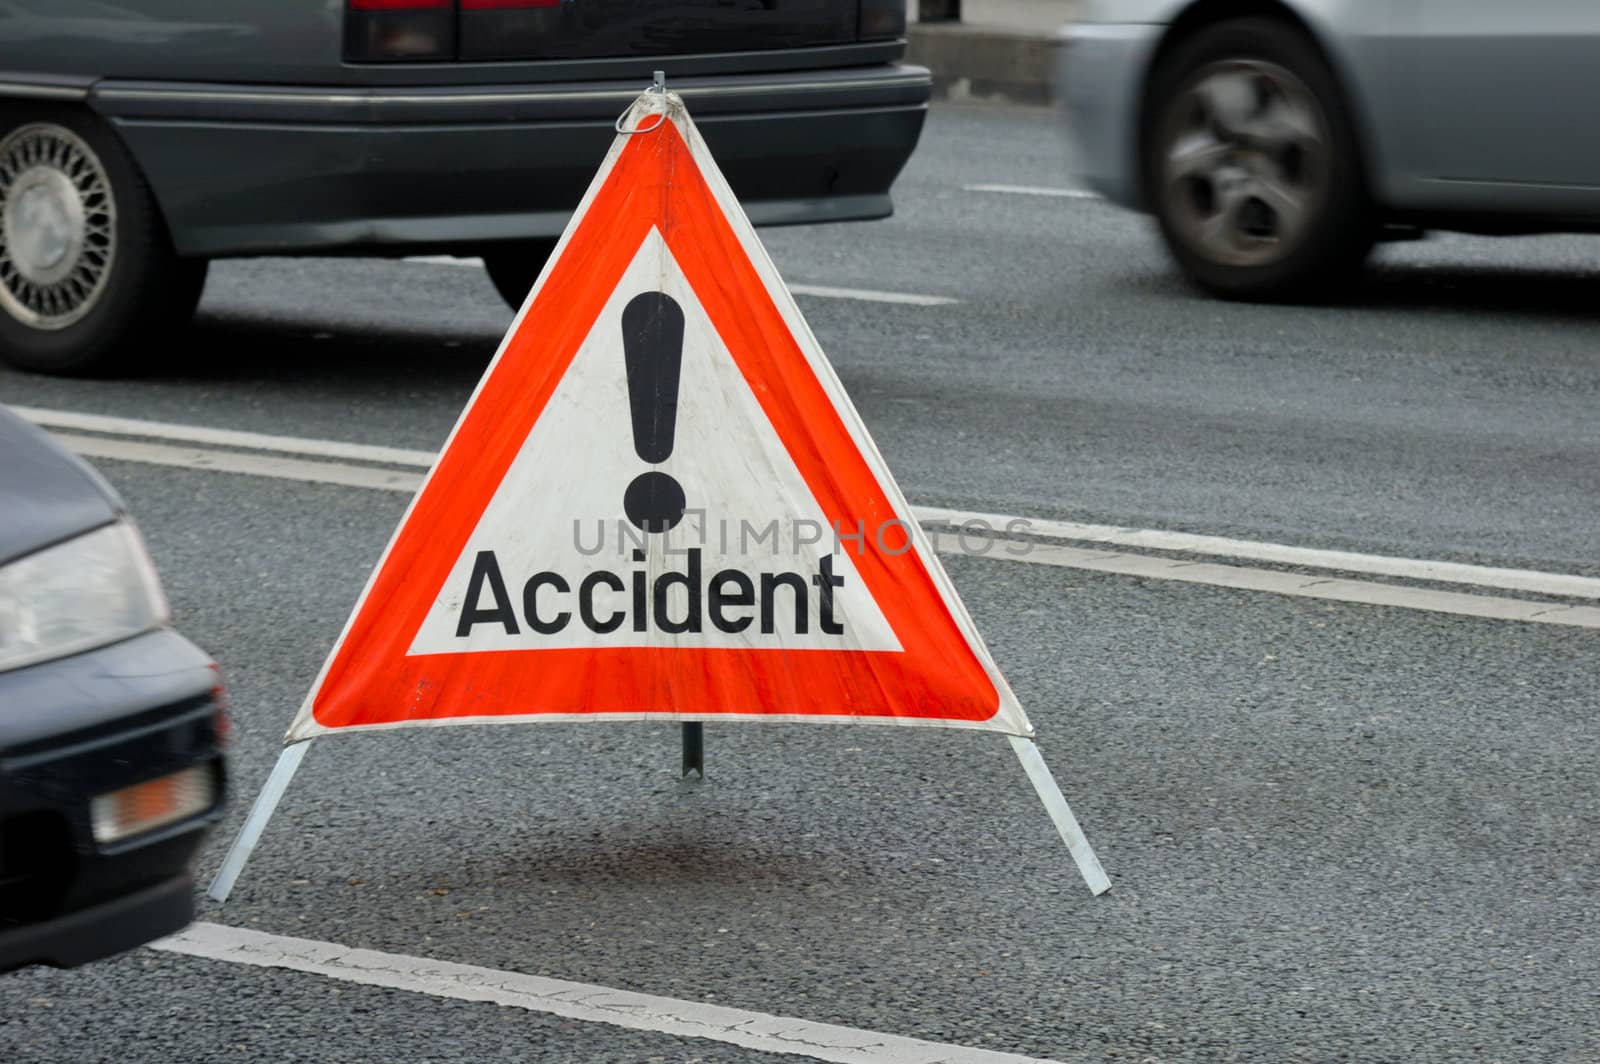 A traffic accident sign in the middle of a busy road, cars passing on either side. Motion blur on the cars.